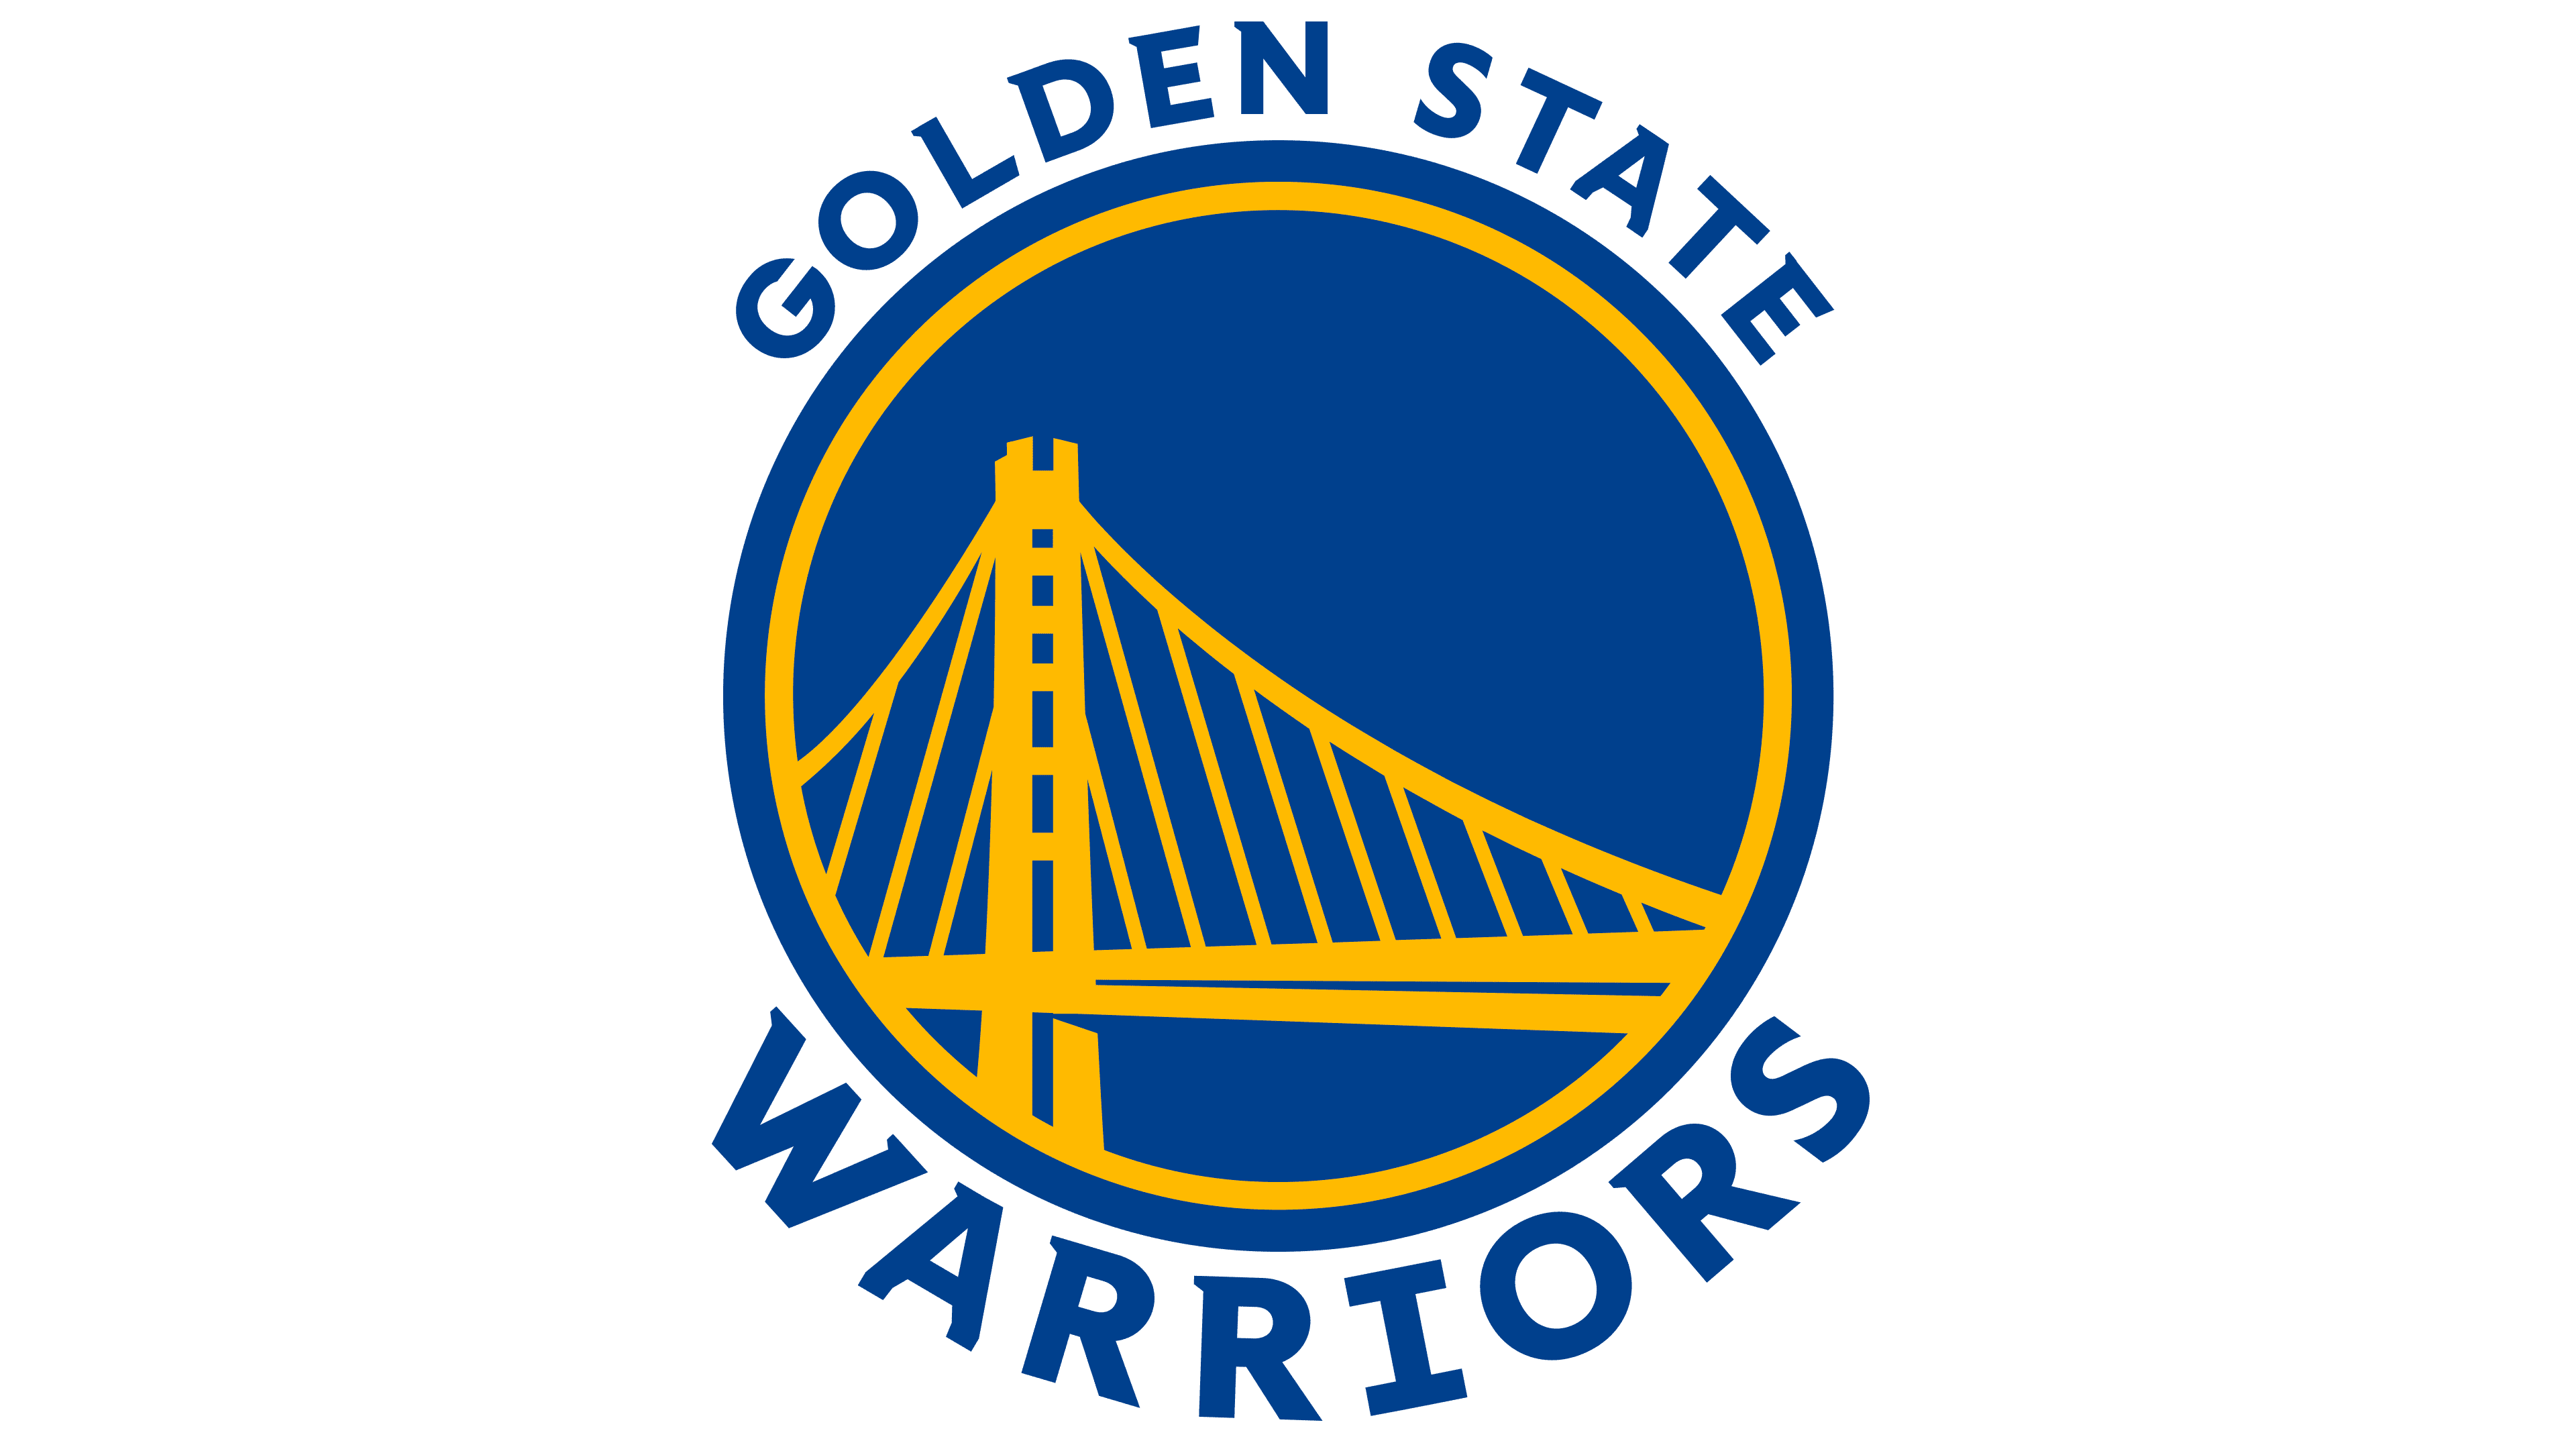 The Golden State Warriors: A History of Dominance in the NBA